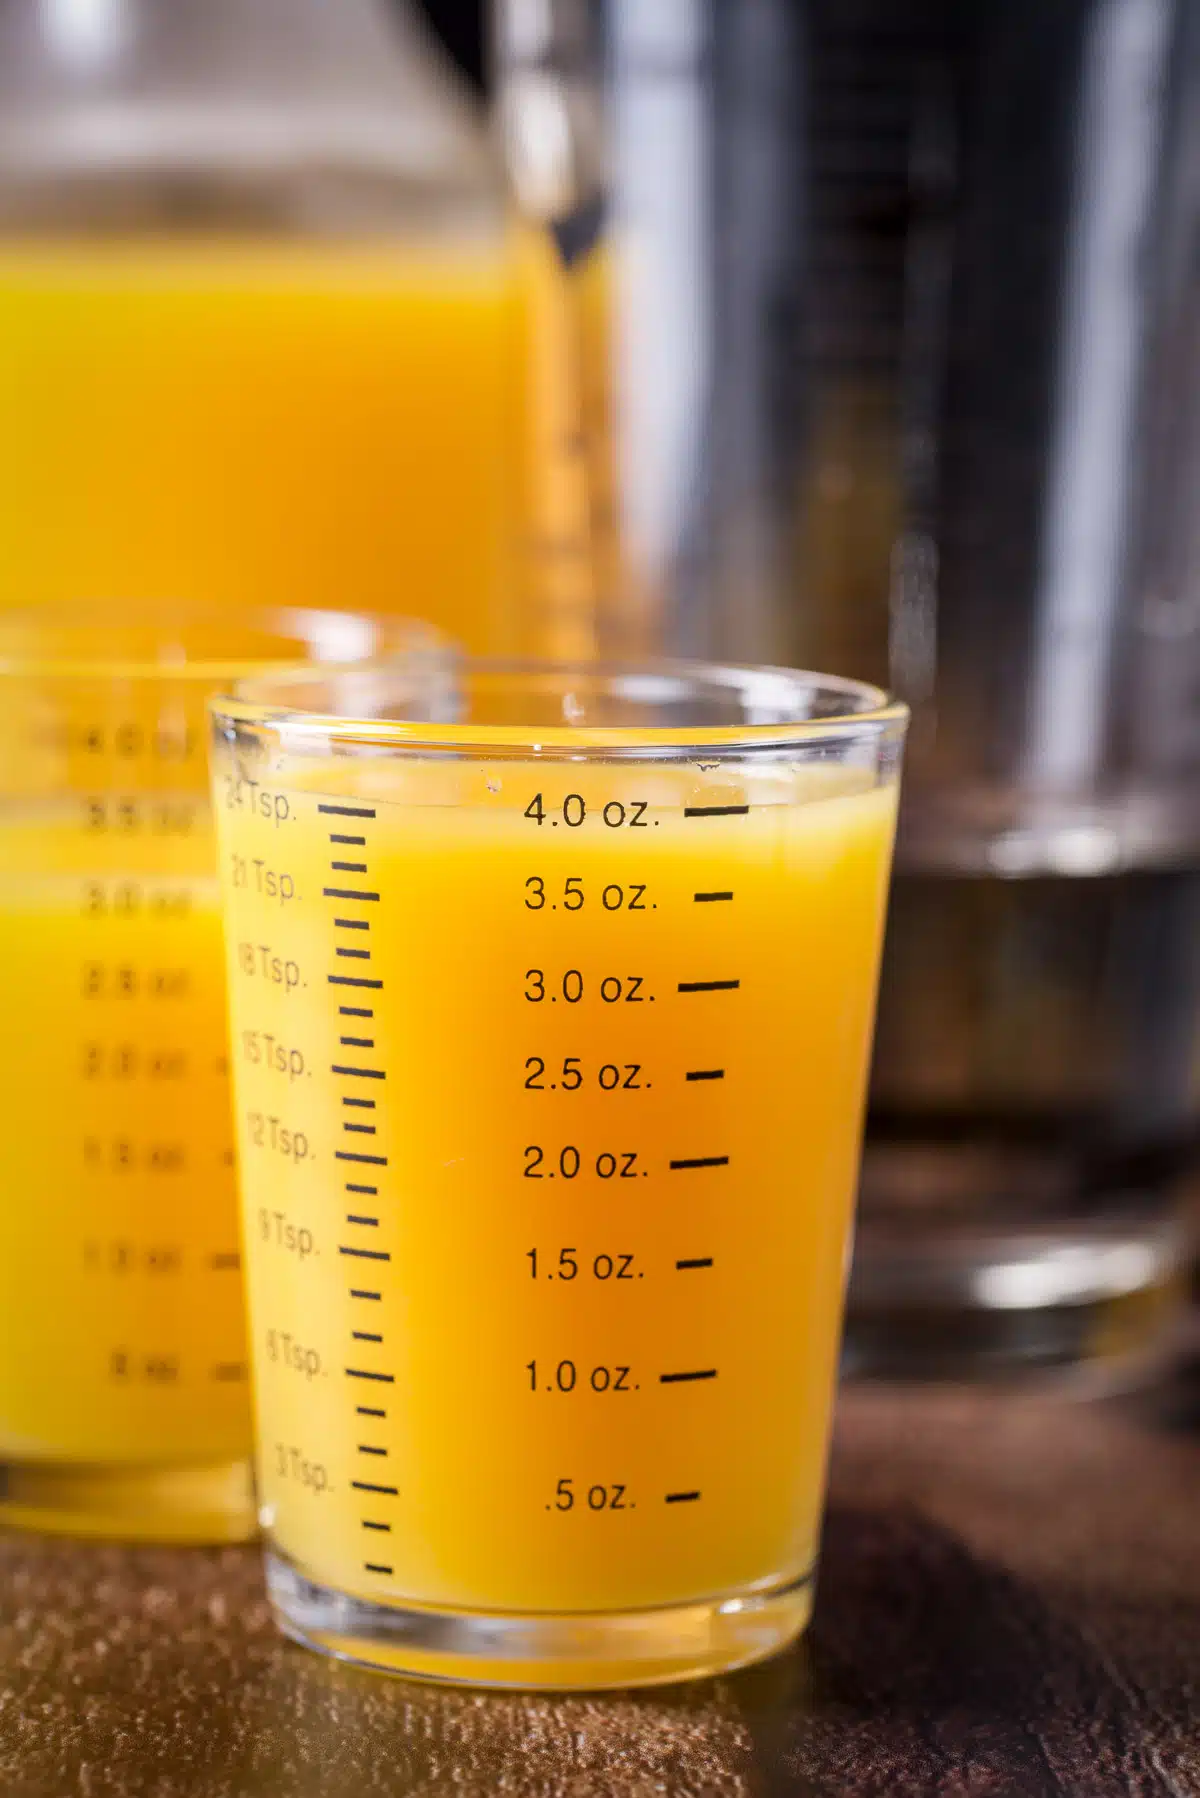 Orange juice measured out with the bottle behind